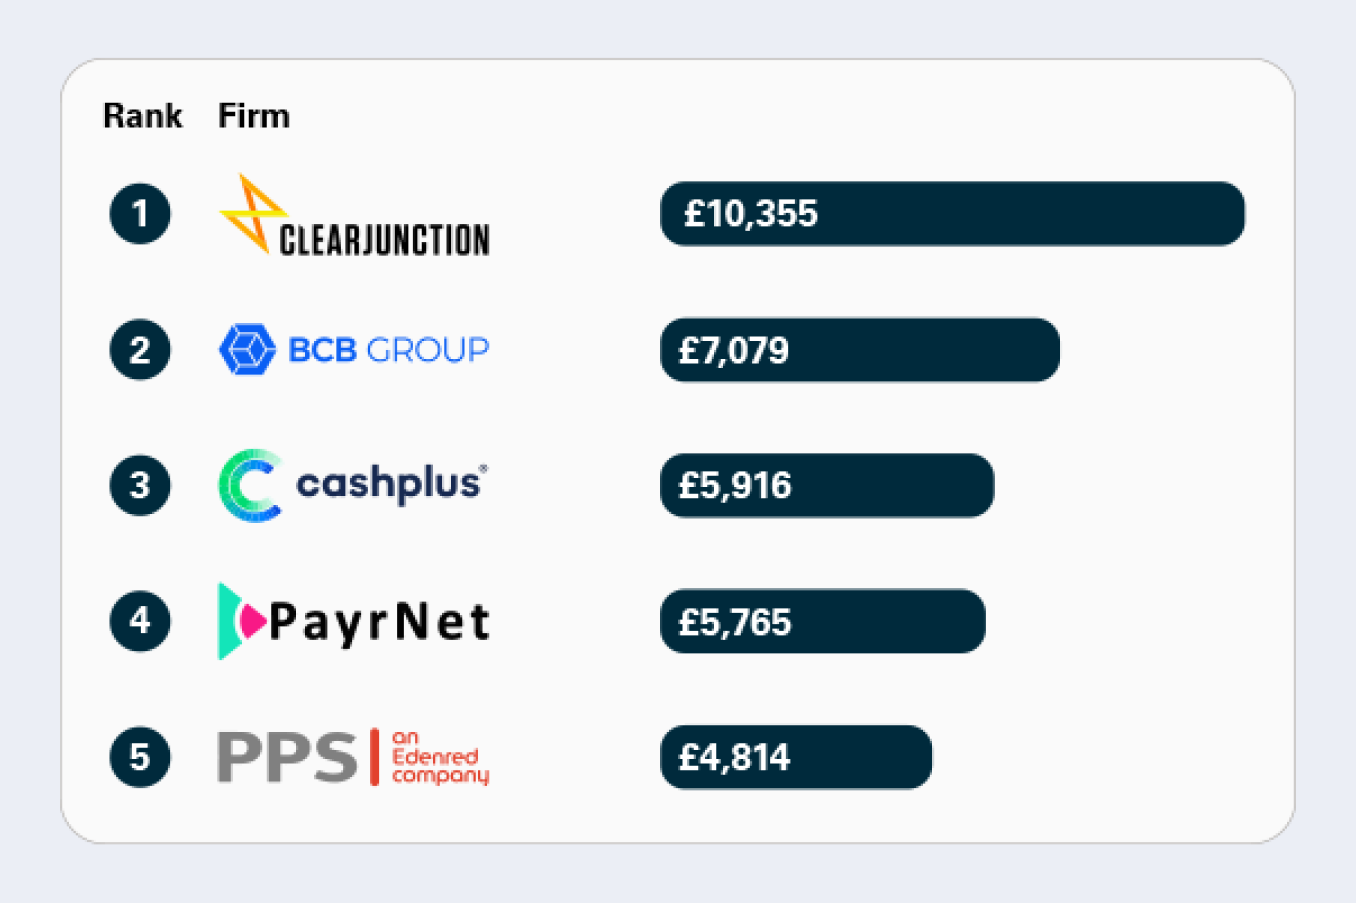 This data shows the amount of APP fraud received per million pounds of transactions, ranked out of 20 firms. Lower figure is better. Starling Bank is not on the list